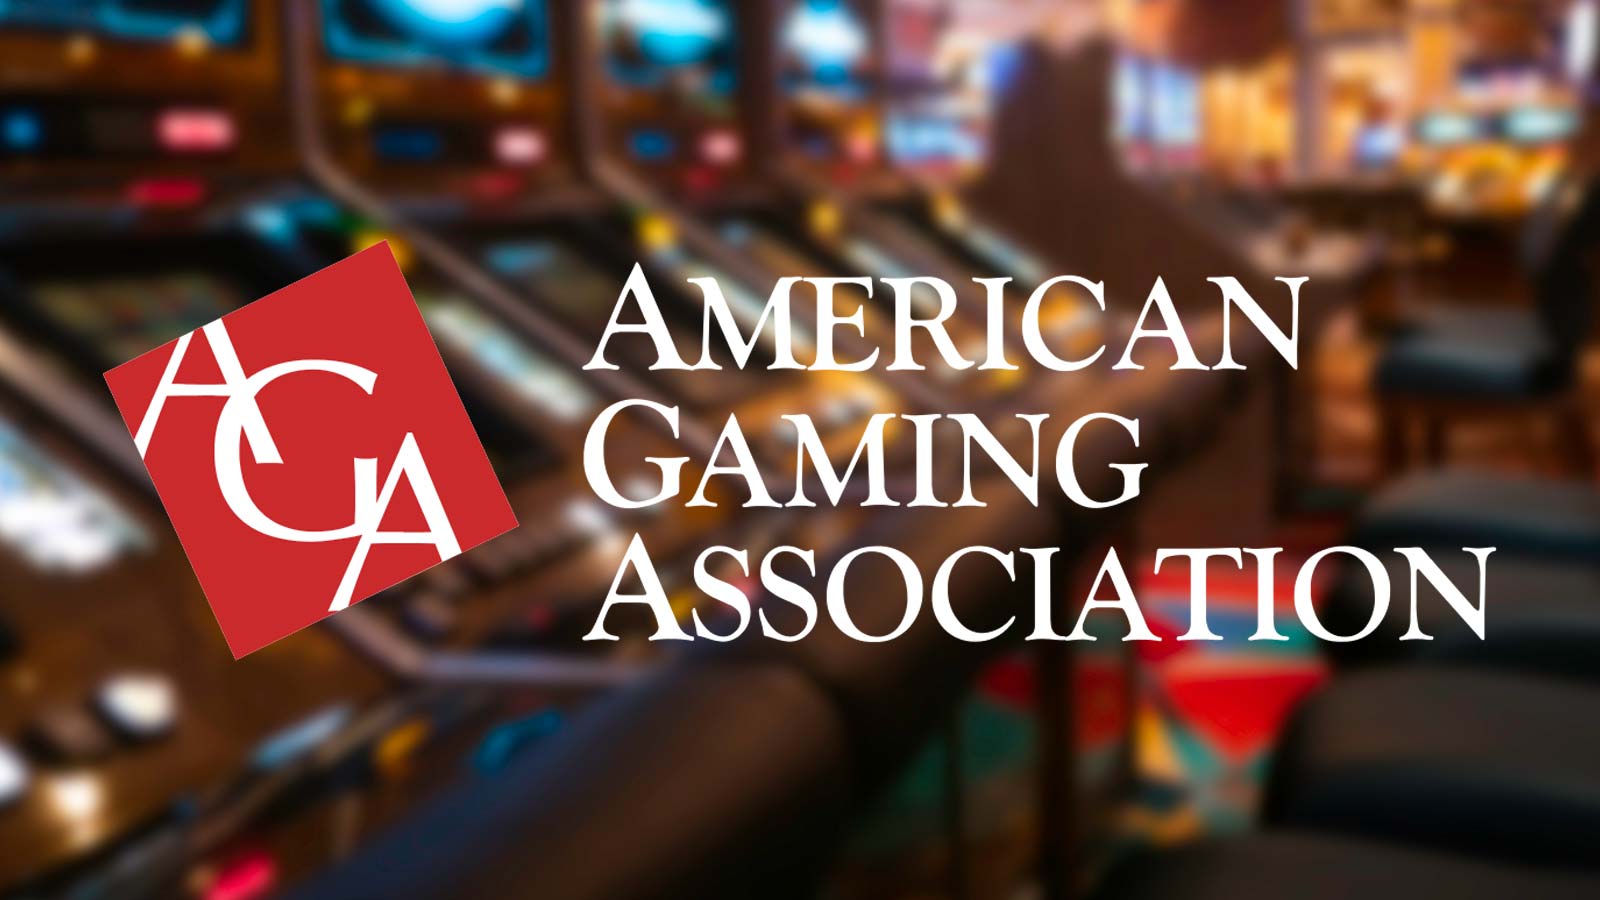 AGA claims the iGaming market shows promising prospects